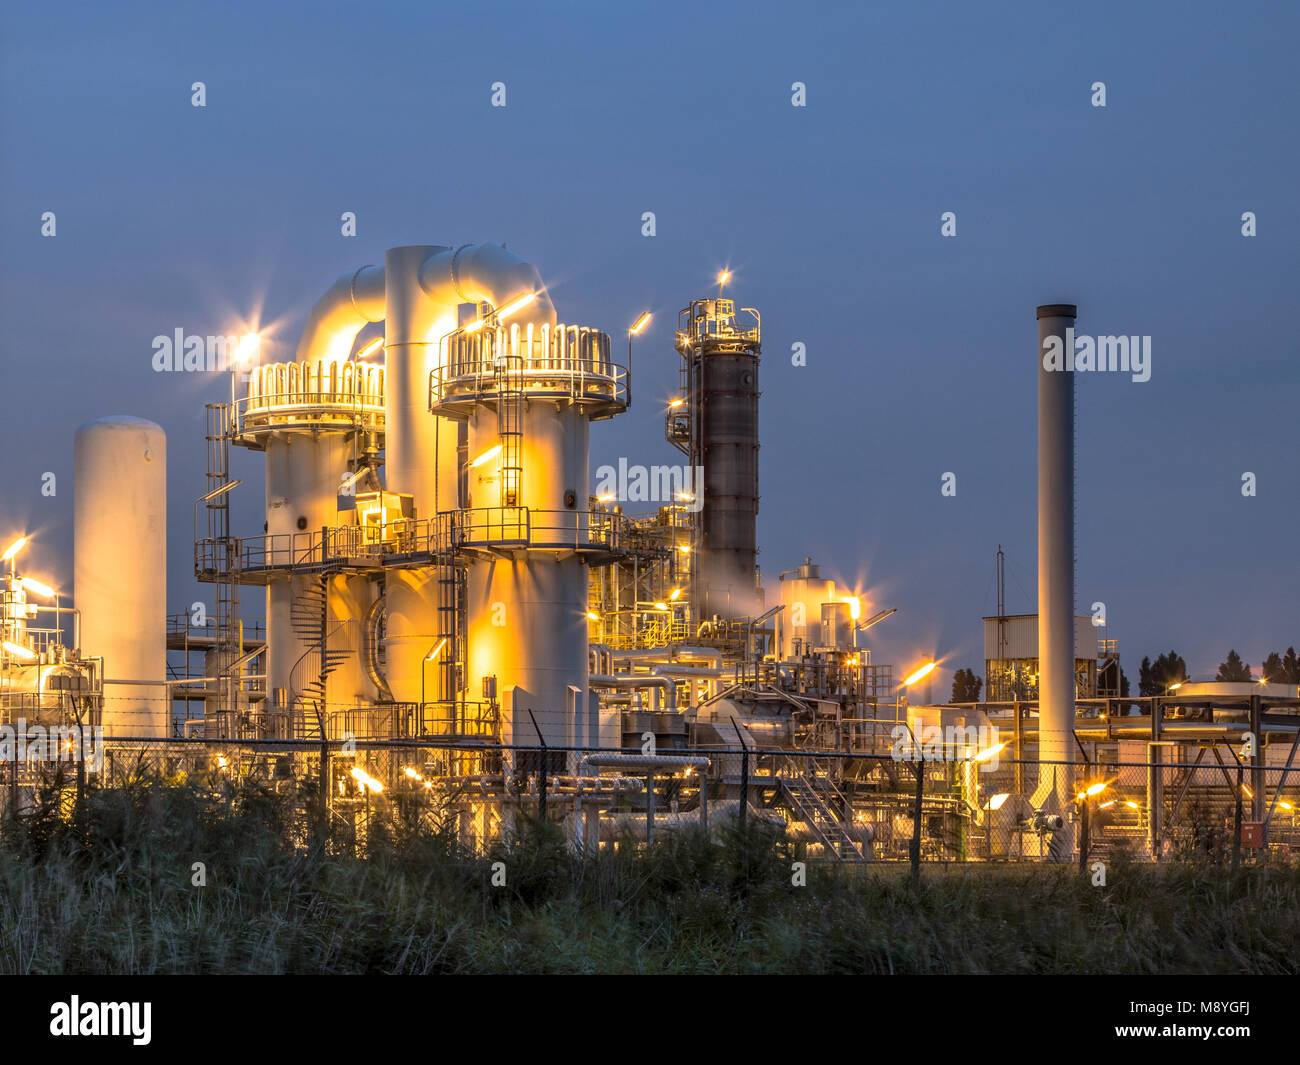 Night scene of the details of a heavy Chemical Industrial plant with mazework of pipes in twilight Stock Photo